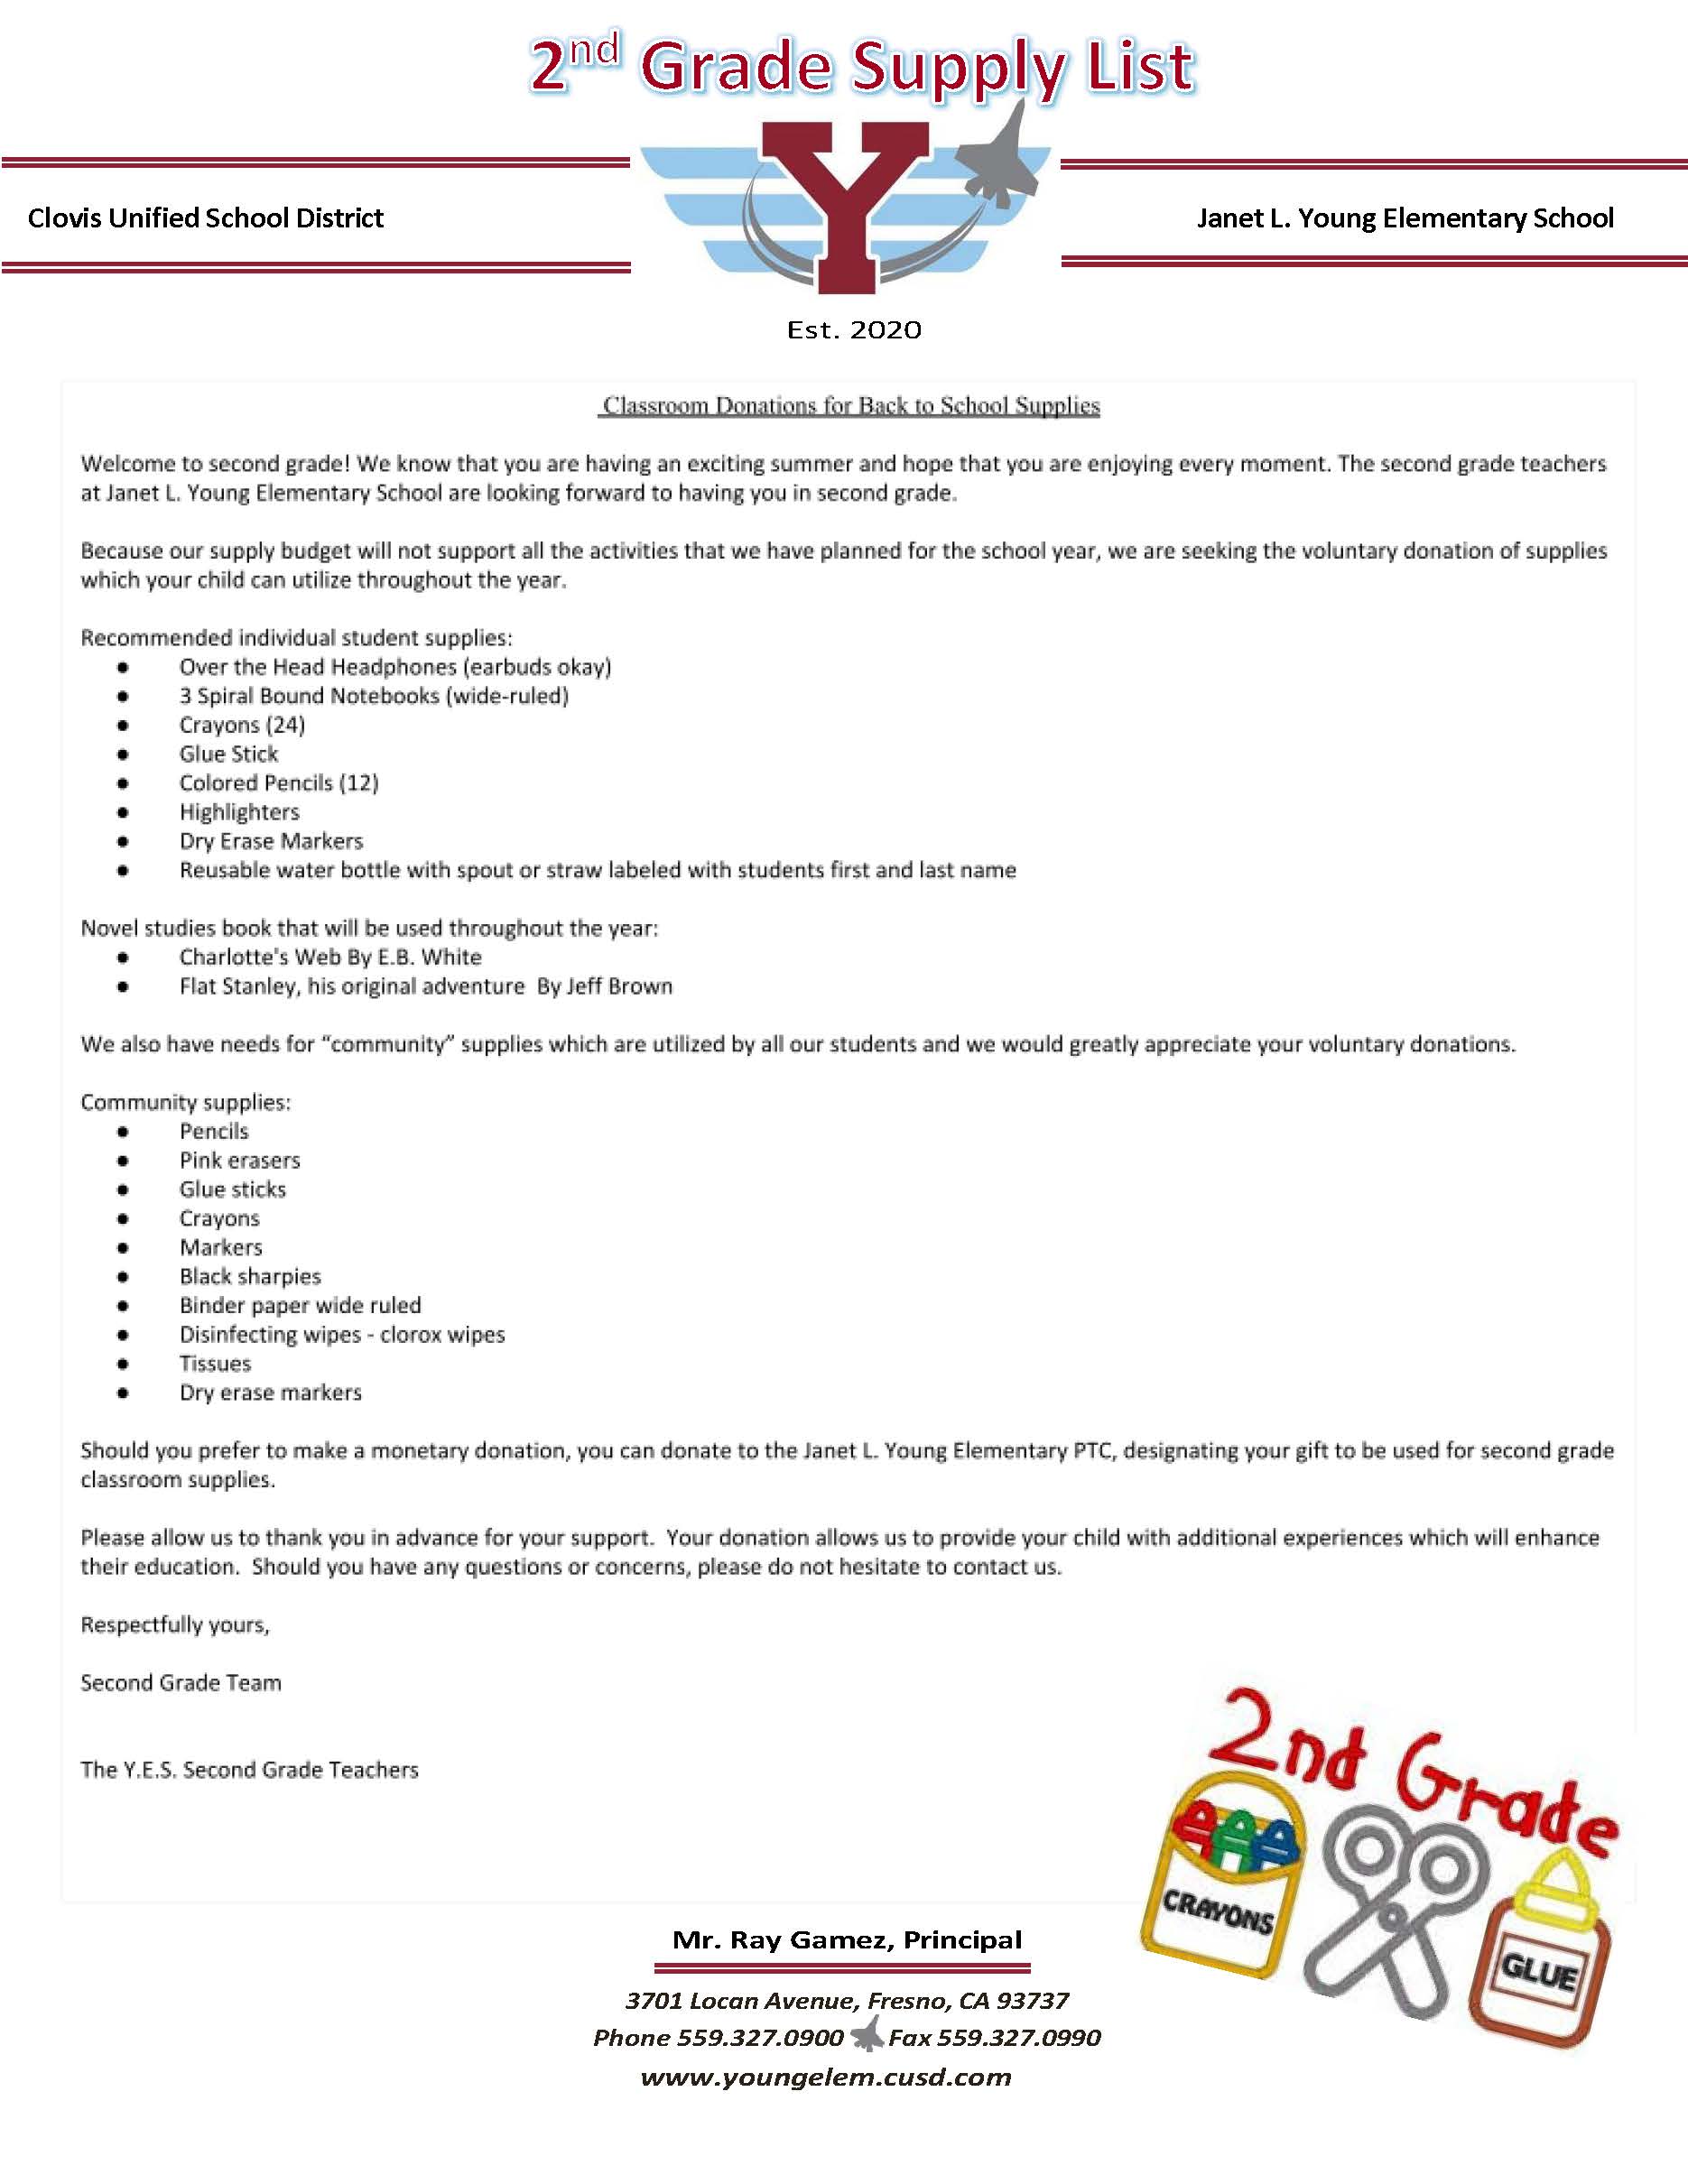 Image for: 2nd Grade 23-24 Supply List Final.pdf